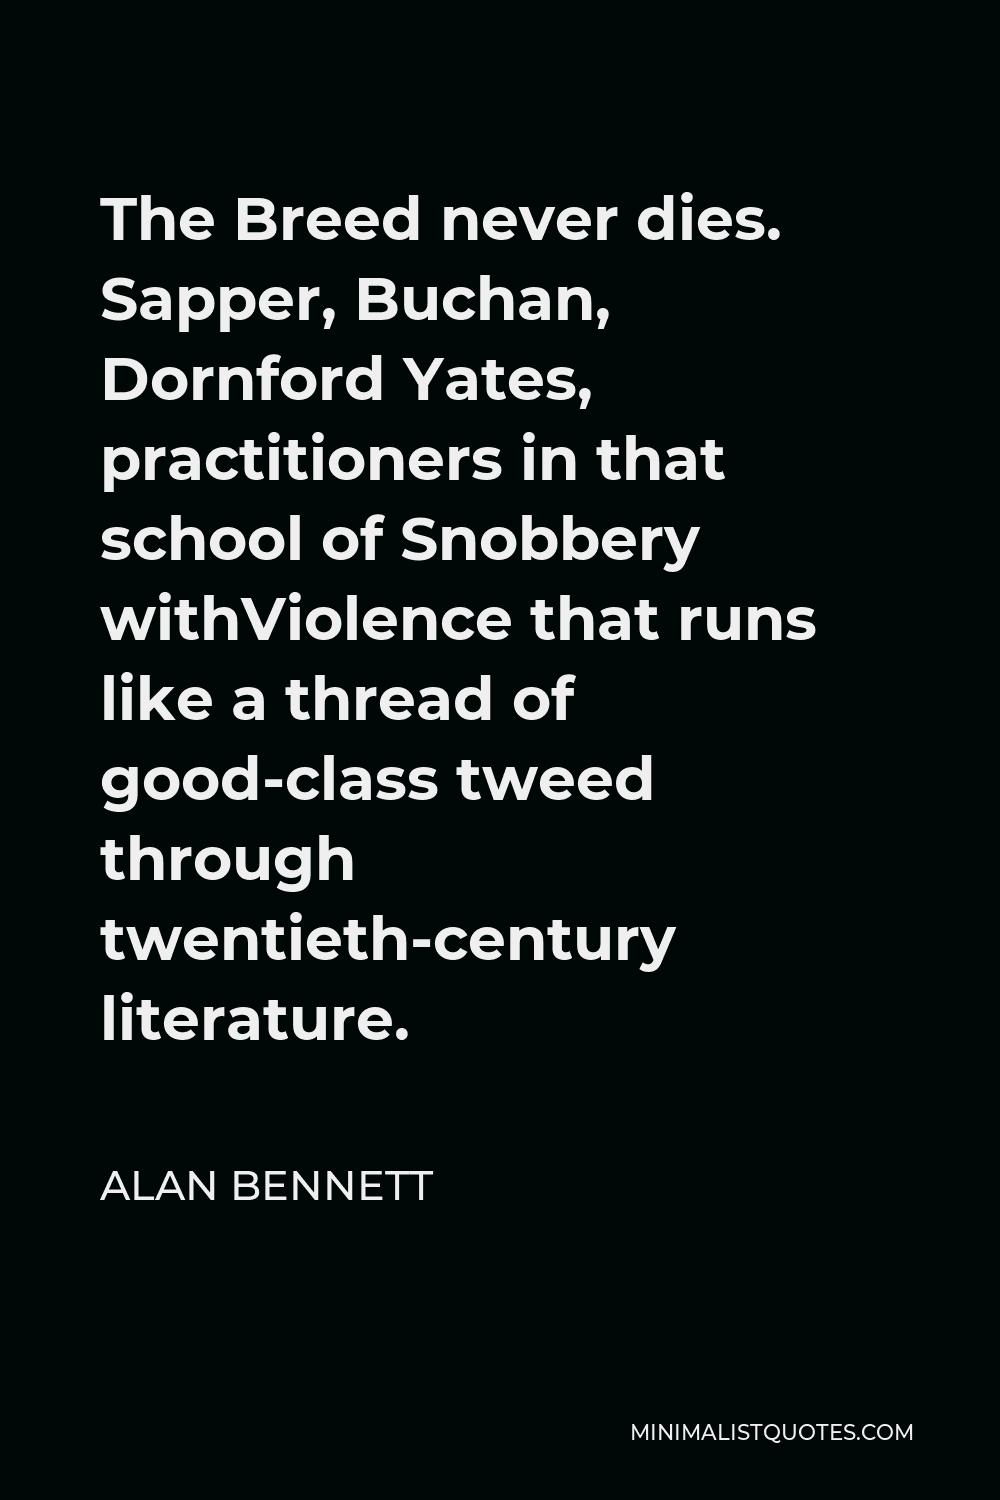 Alan Bennett Quote - The Breed never dies. Sapper, Buchan, Dornford Yates, practitioners in that school of Snobbery withViolence that runs like a thread of good-class tweed through twentieth-century literature.